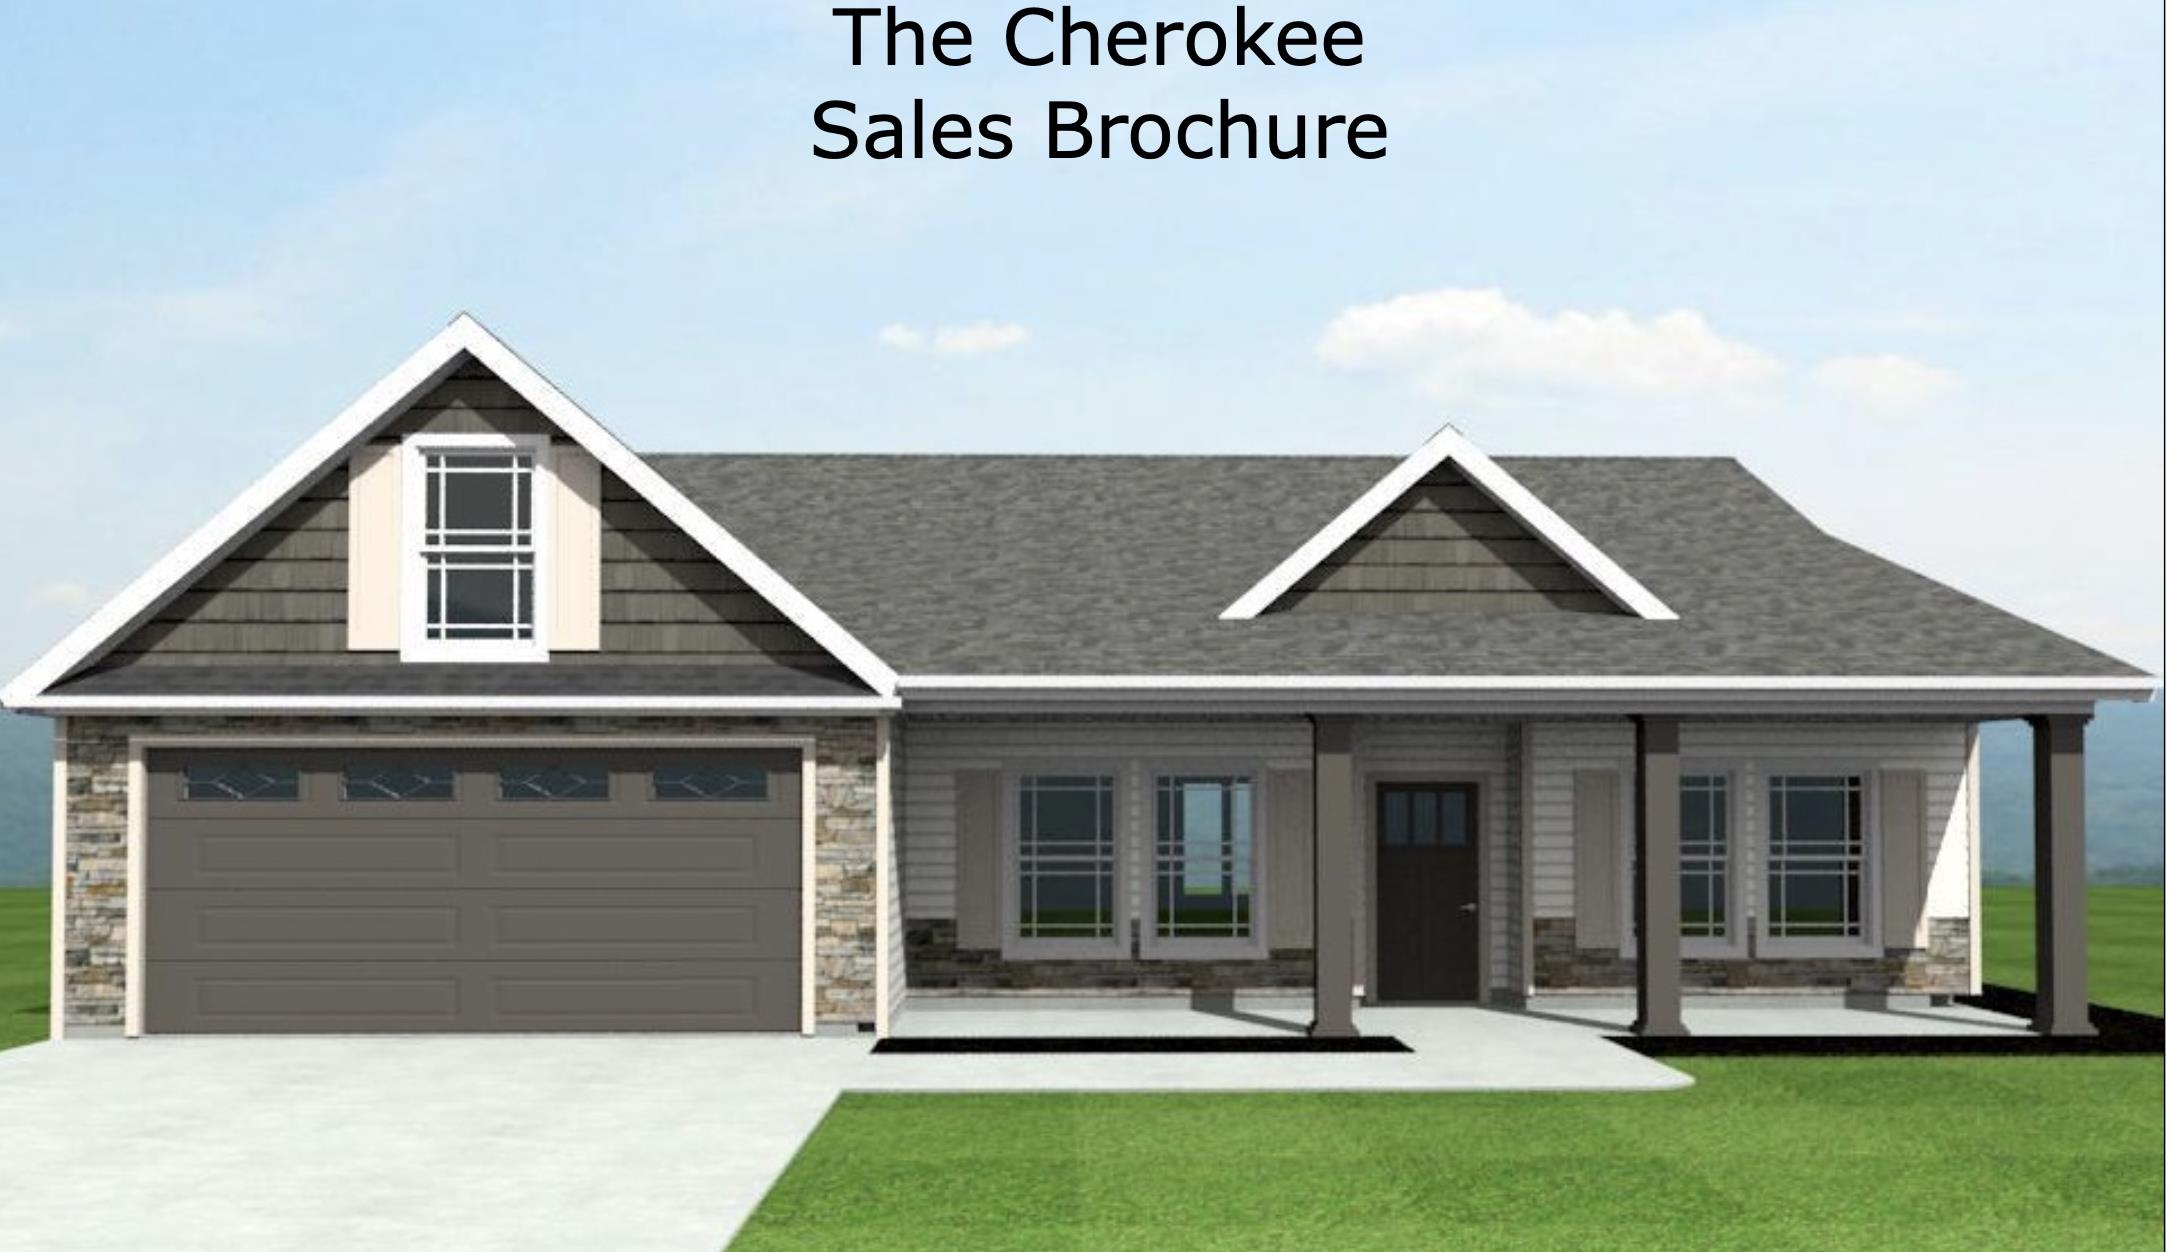 The Cherokee plan.  This spacious 4 bedroom plan offers a sunroom.